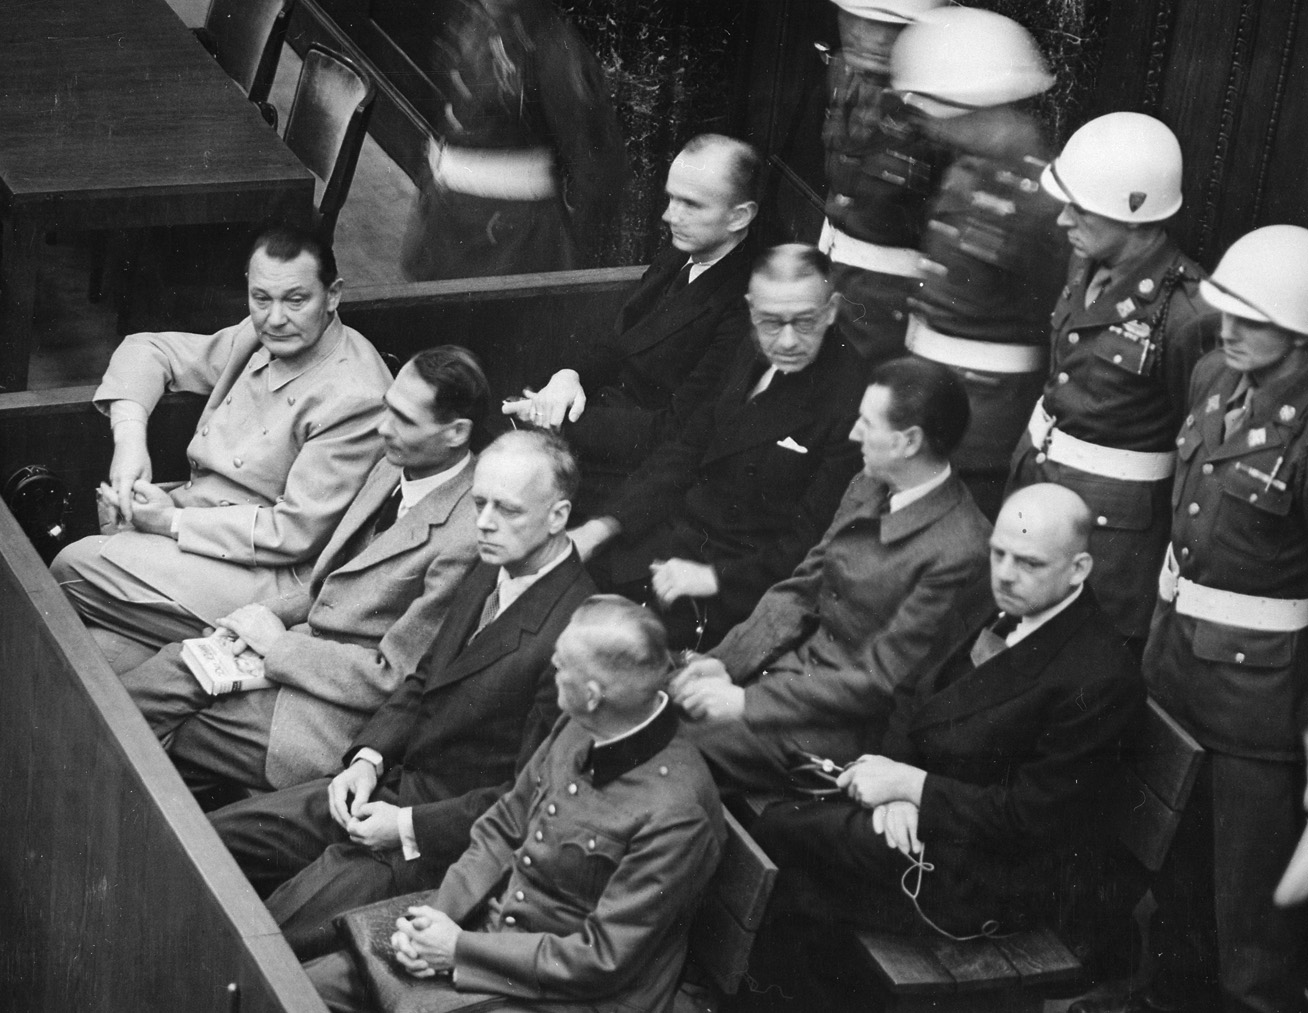 Hess, seated second from left next to Reichsmarschal Hermann Göring, is shown at the Nuremberg Trials. He was sentenced to life in prison in 1946.